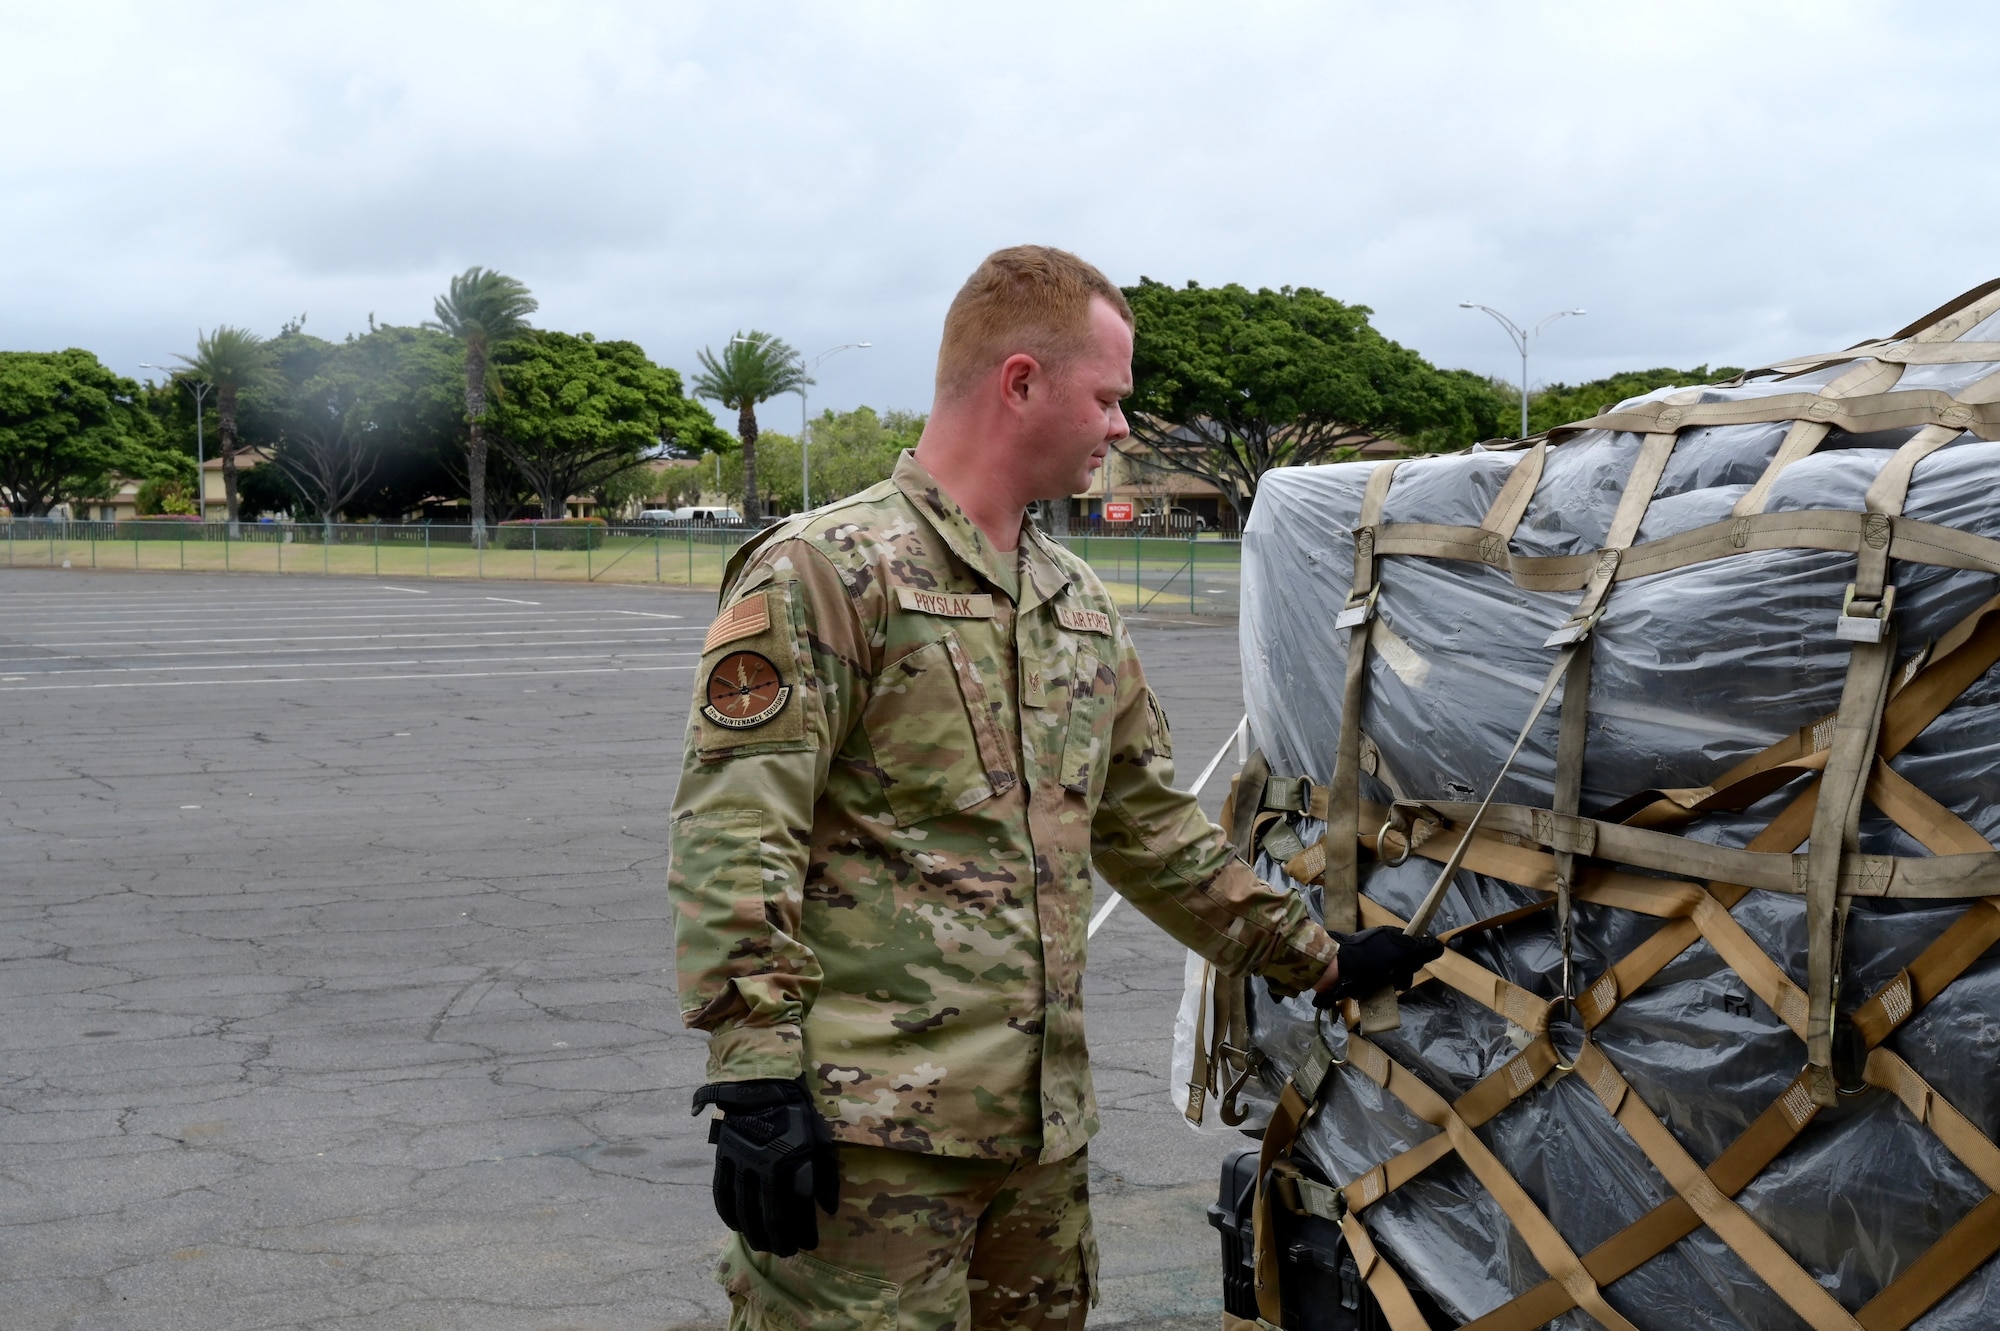 Staff Sgt. Christopher Pryslak, 15th Maintenance Squadron aerospace propulsion technician, checks to make sure the straps are secured on a simulated-cargo pallet during the 15th Wing’s Multi-Capable Airmen Tier 1 training event at Joint Base Pearl Harbor-Hickam, Hawaii, May 19, 2022. This event served as the 15th Wing’s first-ever MCA training event and involved Airmen from across JBPHH. (U.S. Air Force photo by 1st Lt. Benjamin Aronson)